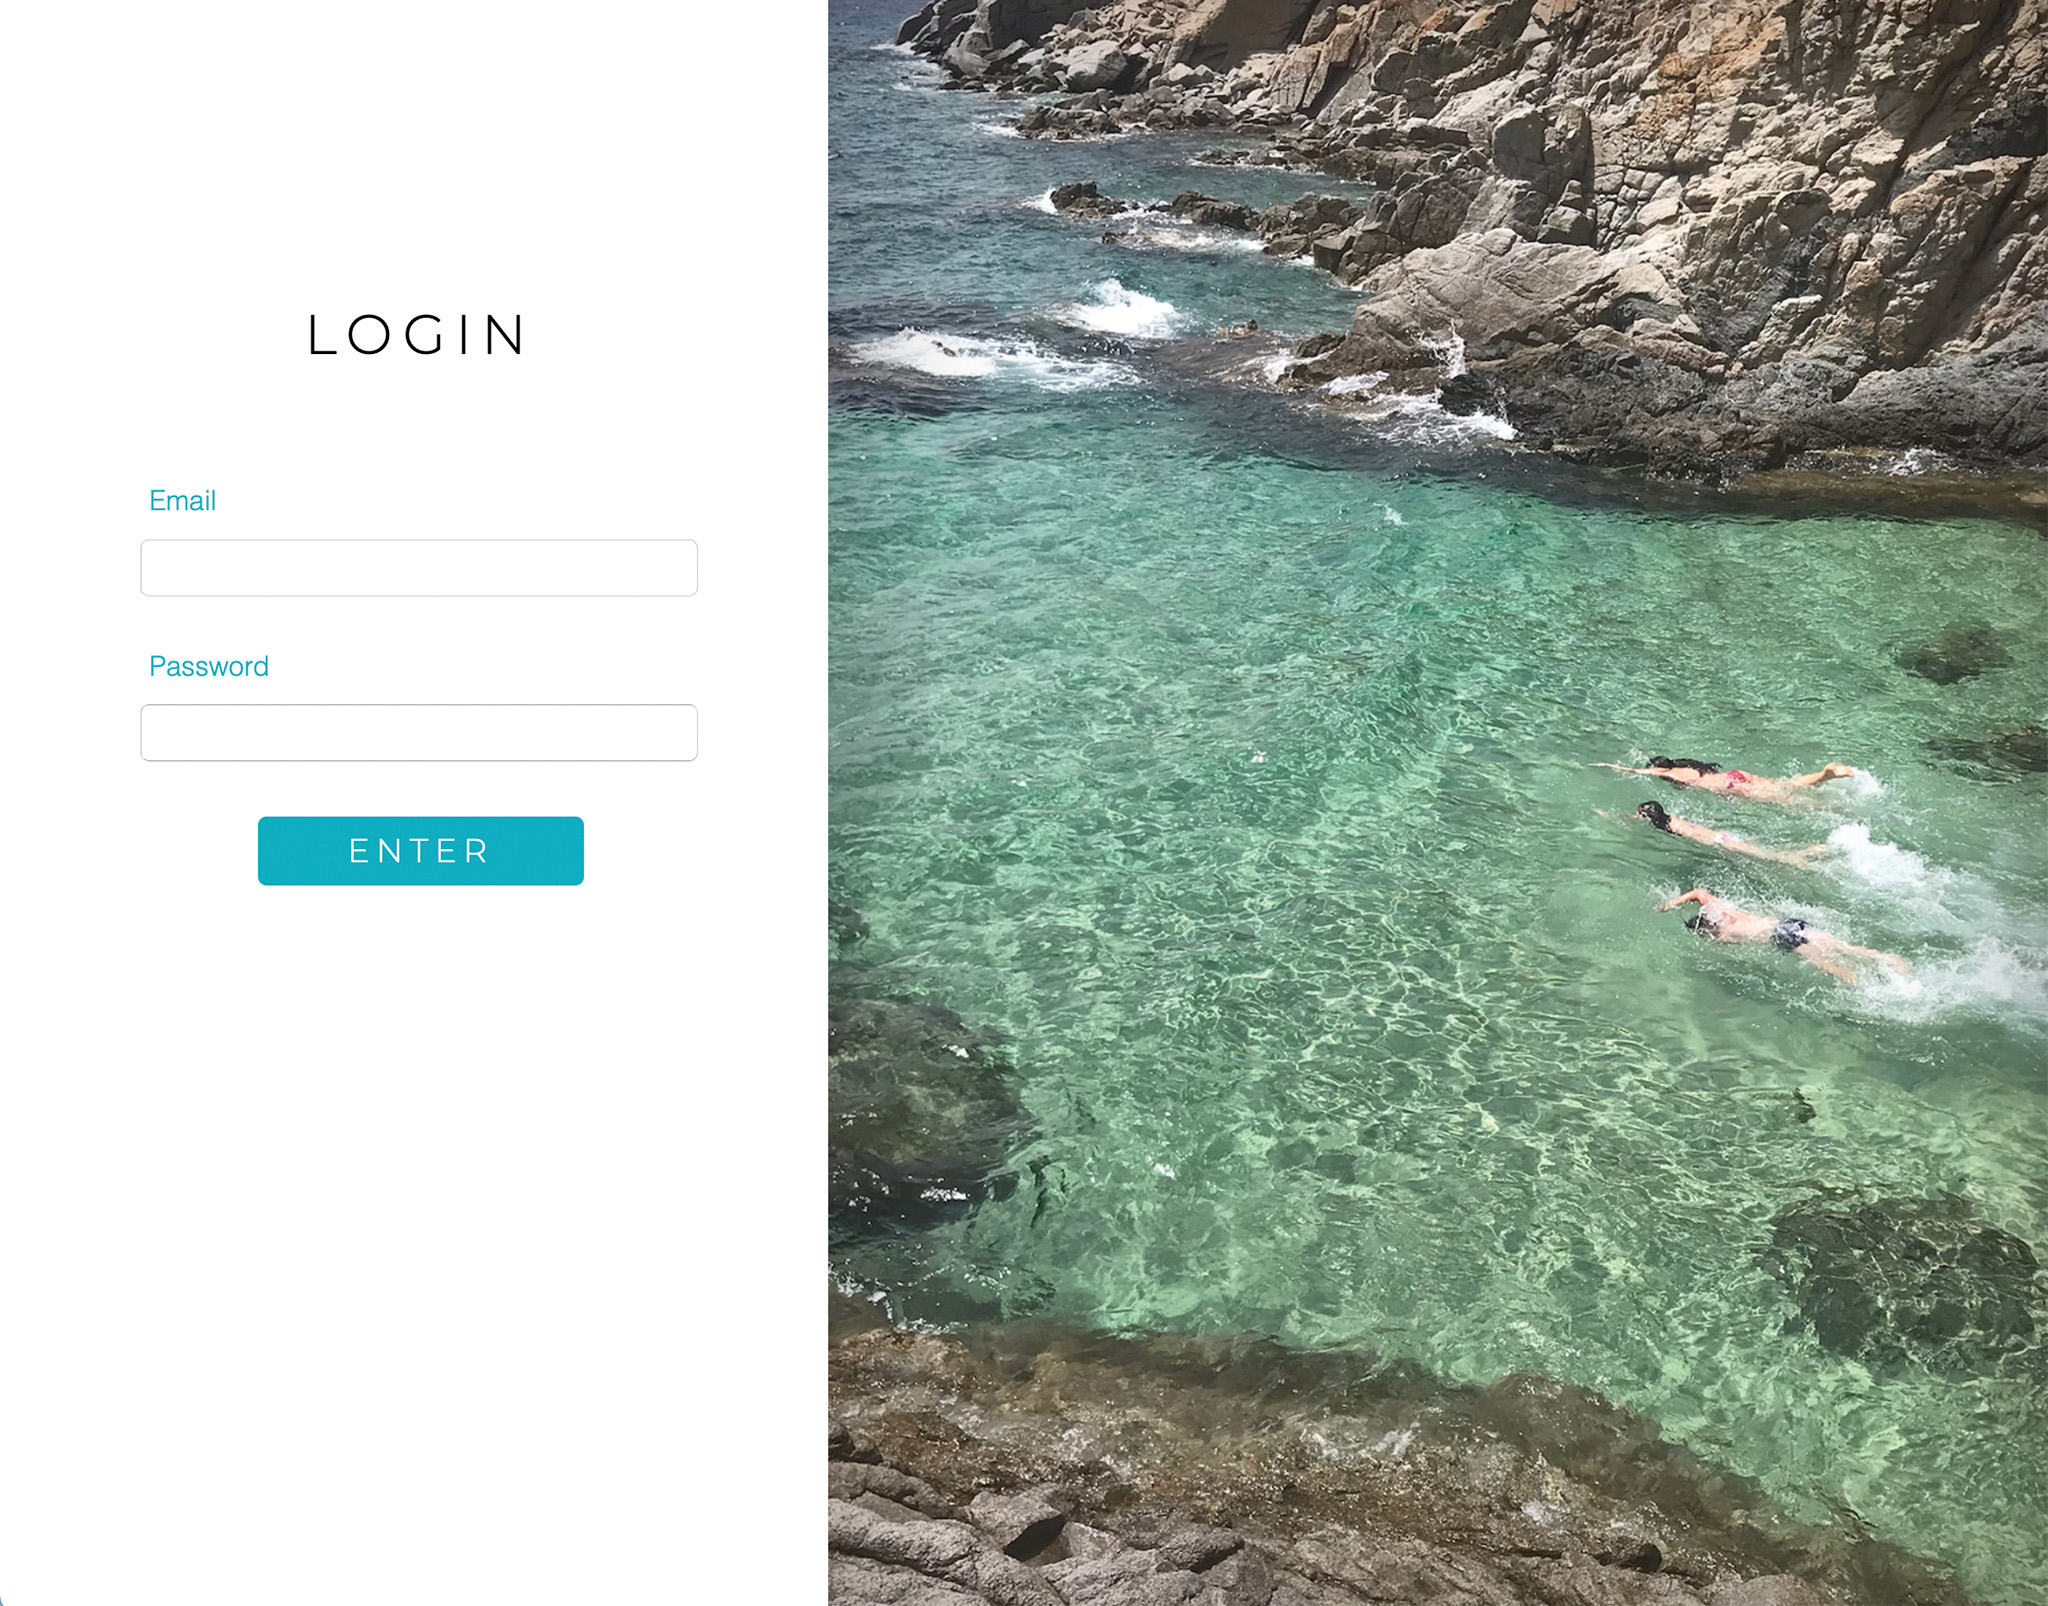 This is the contact form created for the Villa Girasole rental home in Sardinia. It features a blue button and a large visual of three children swimming in the clear turquoise water.